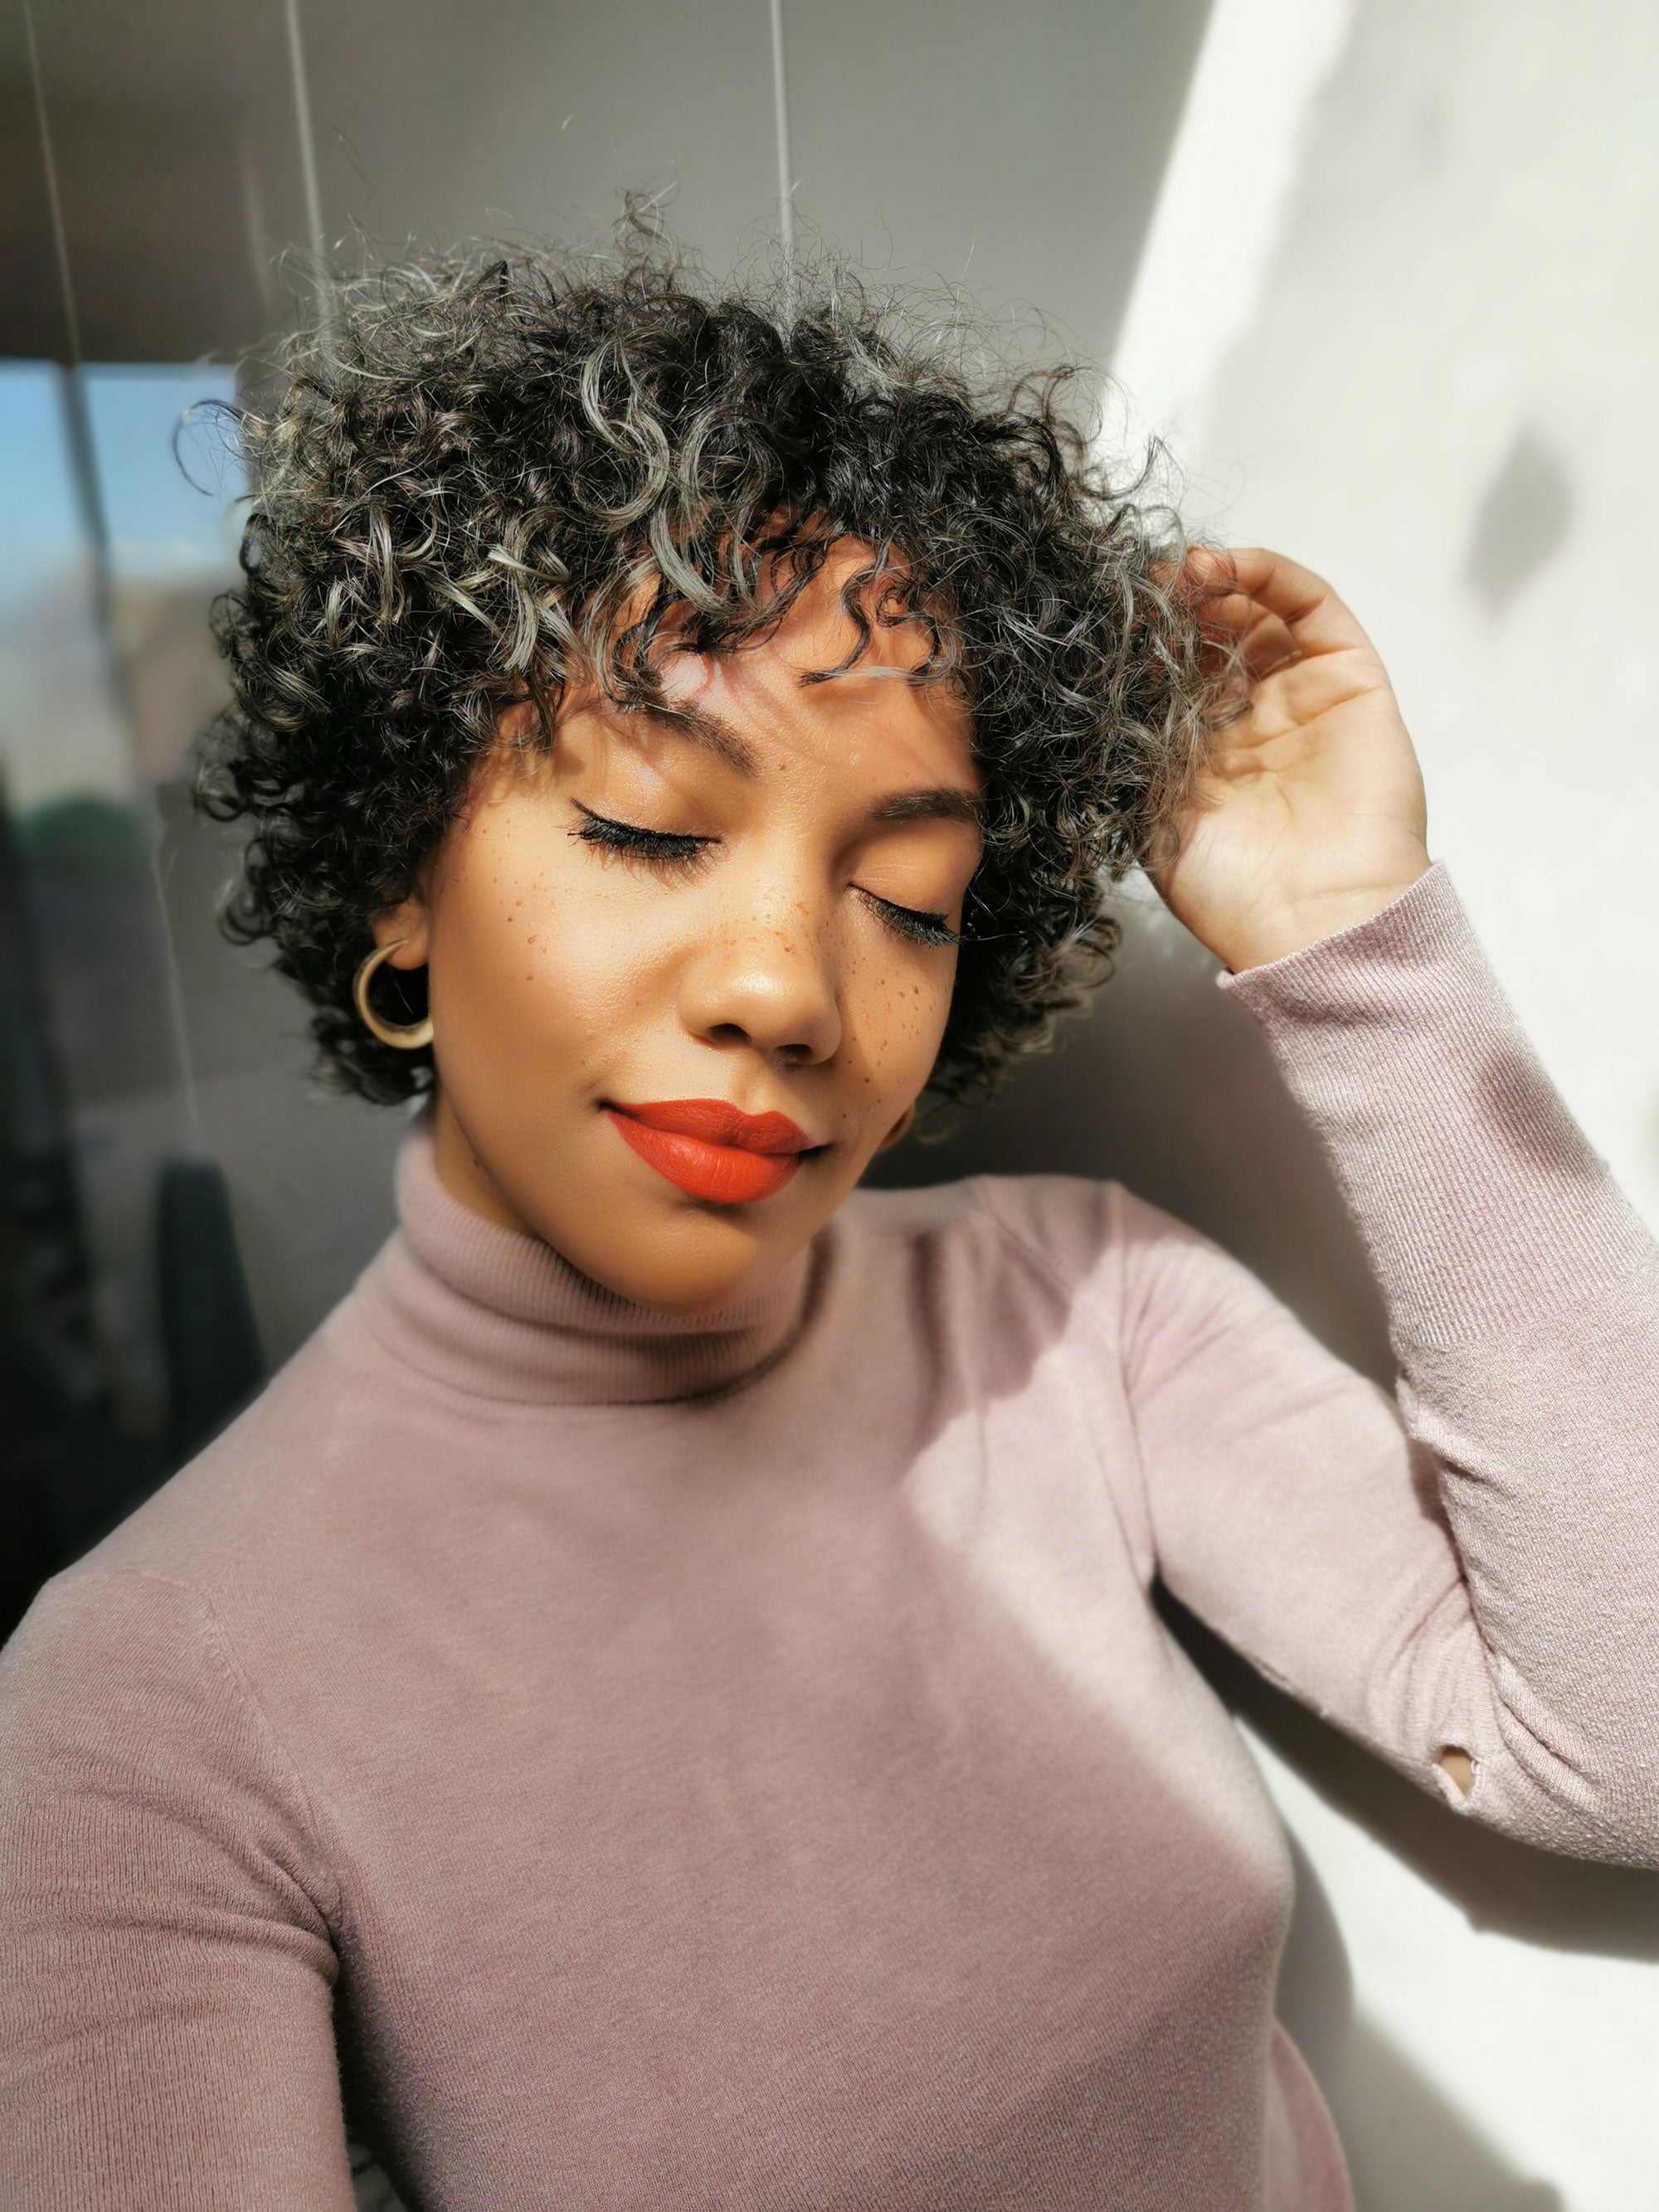 7 Stylish Short Bob Haircuts To Try For Your Next Big Chop